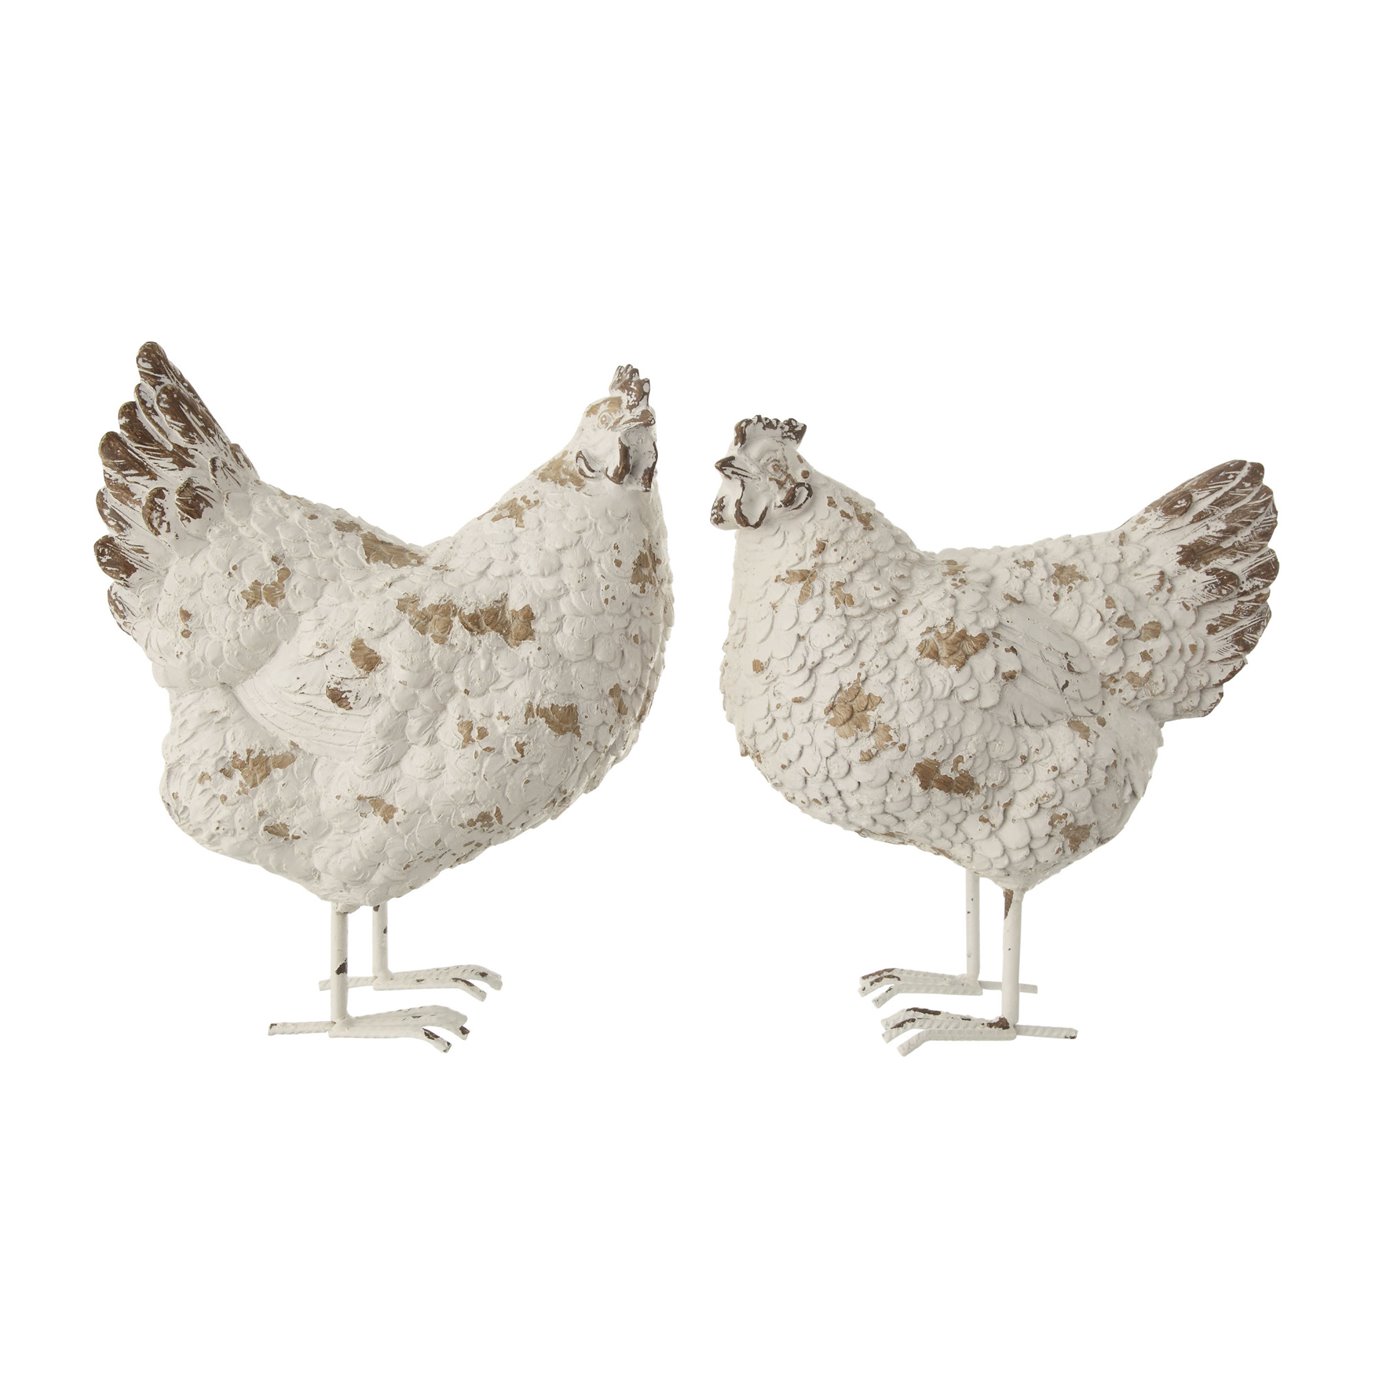 Distressed White Resin Hen Figurine with Metal Feet (Set of 2 Styles)